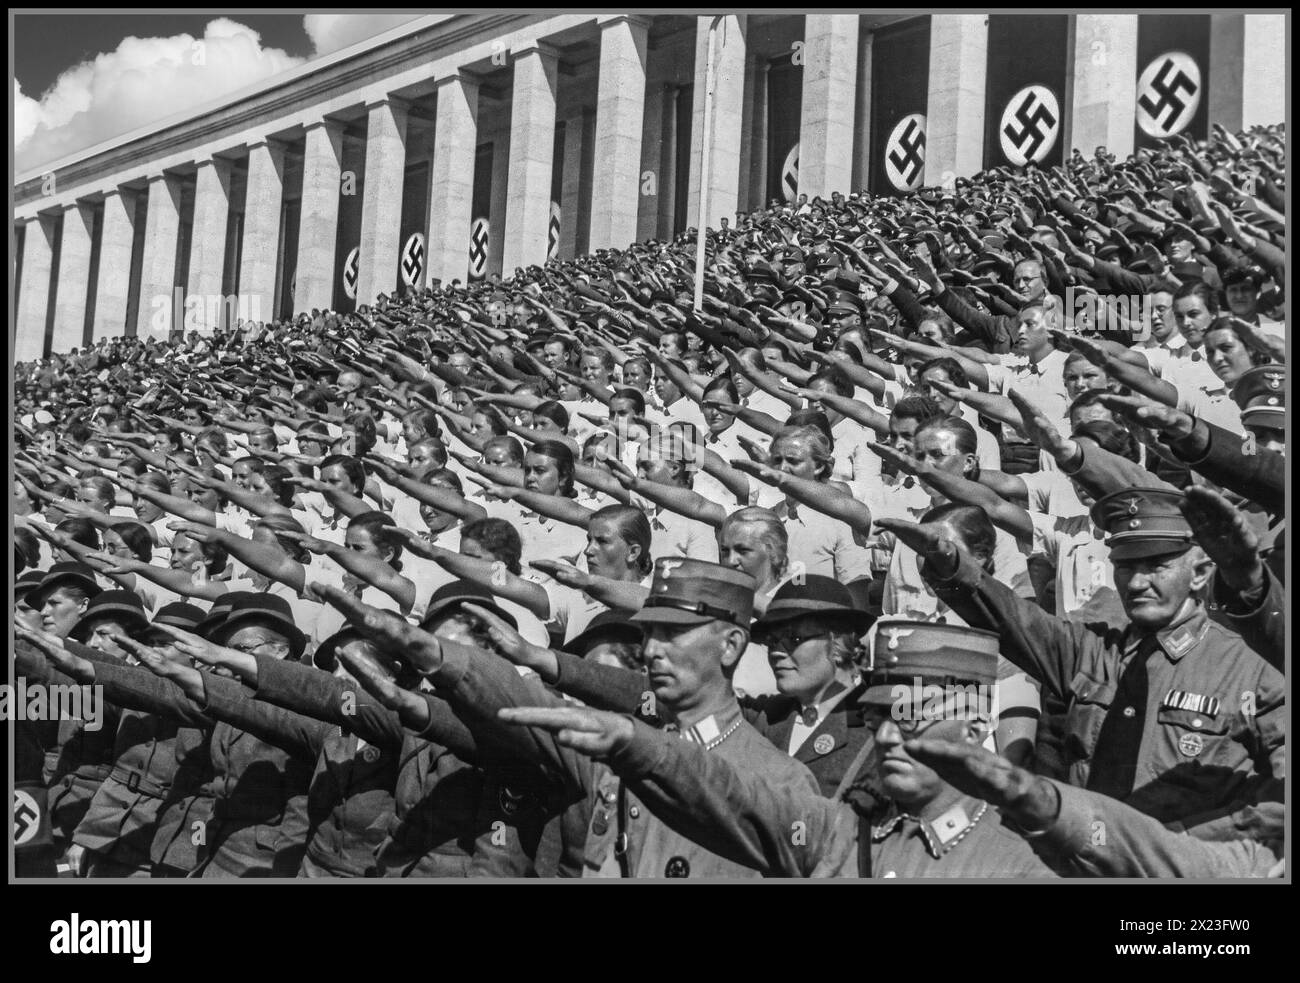 1930s Nuremberg Nazi Germany rally, with participants including members of the paramilitary army the Sturmbleitung and girls of the BDM. BUND DEUTSCHER MADEL., the girls youth wing of The Nazi Party. All  giving Adolf Hitler the Nazi Heil Hitler salute. Nuremberg Nurnberg Nazi Germany Stock Photo